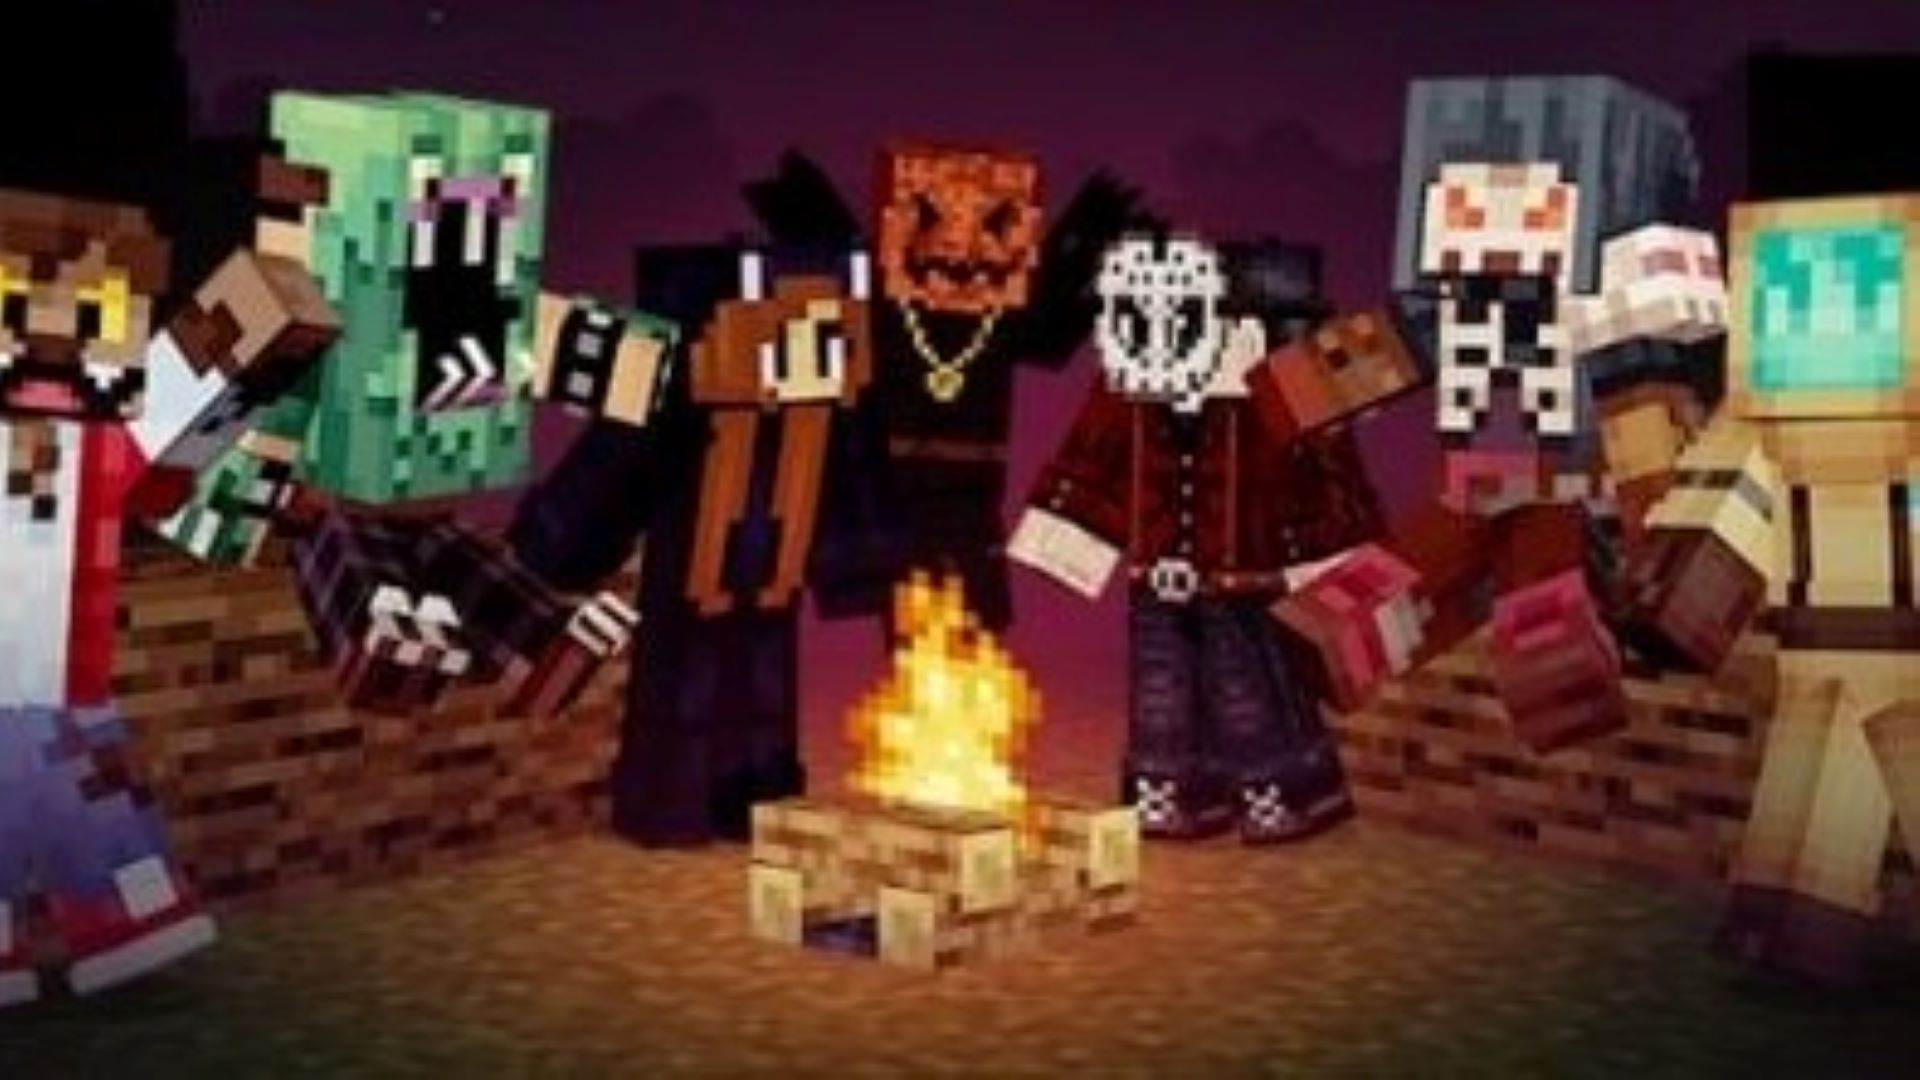 Halloween skins come to Minecraft